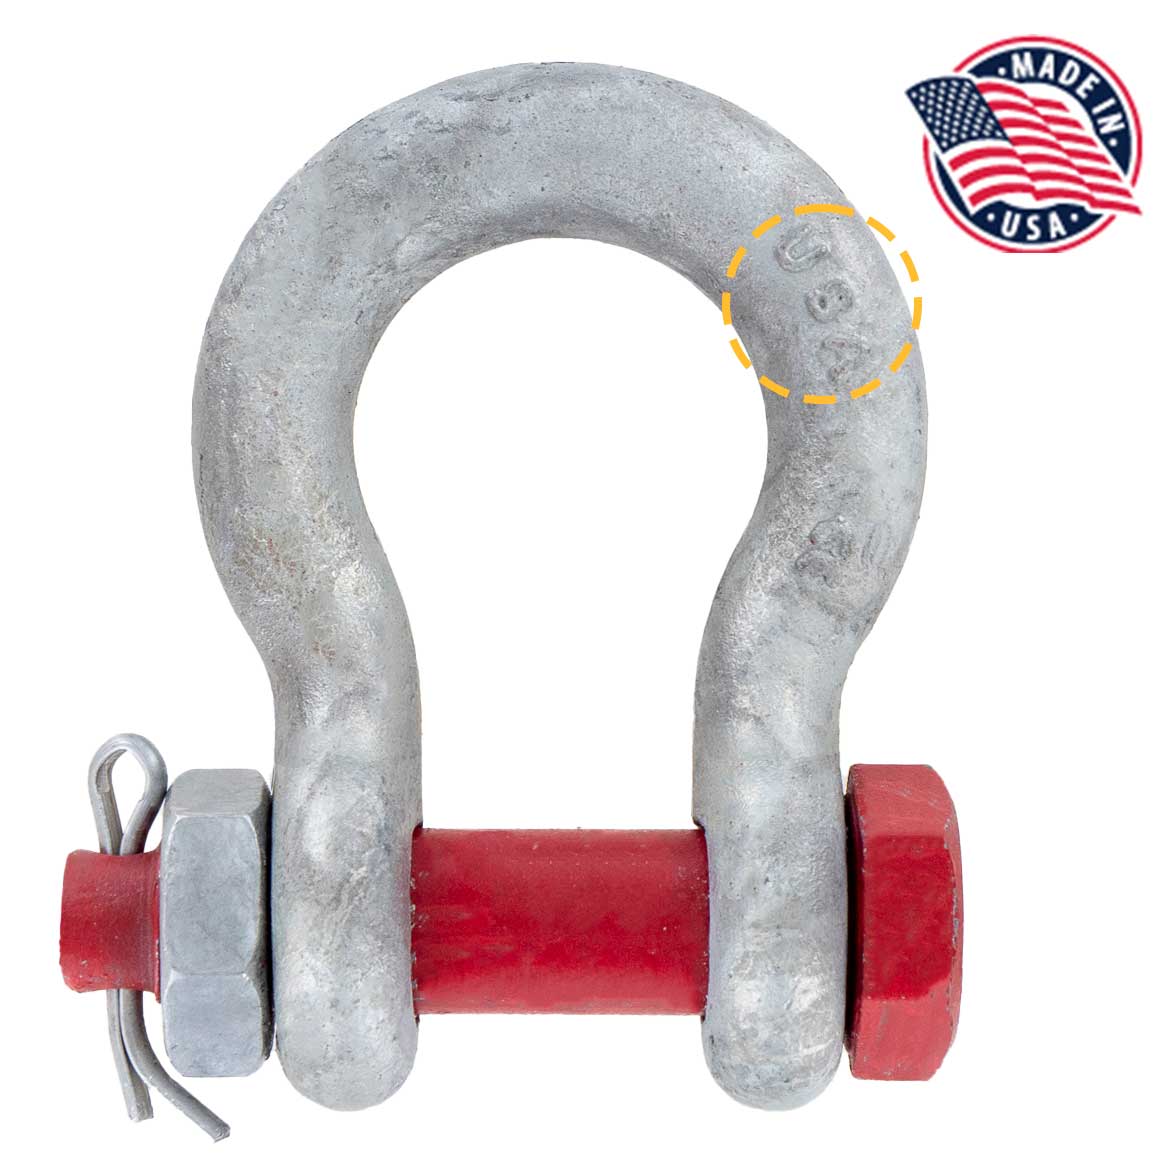 5/8" Crosby® Bolt Type Anchor Shackle | G-2130 - 3.25 Ton made in USA